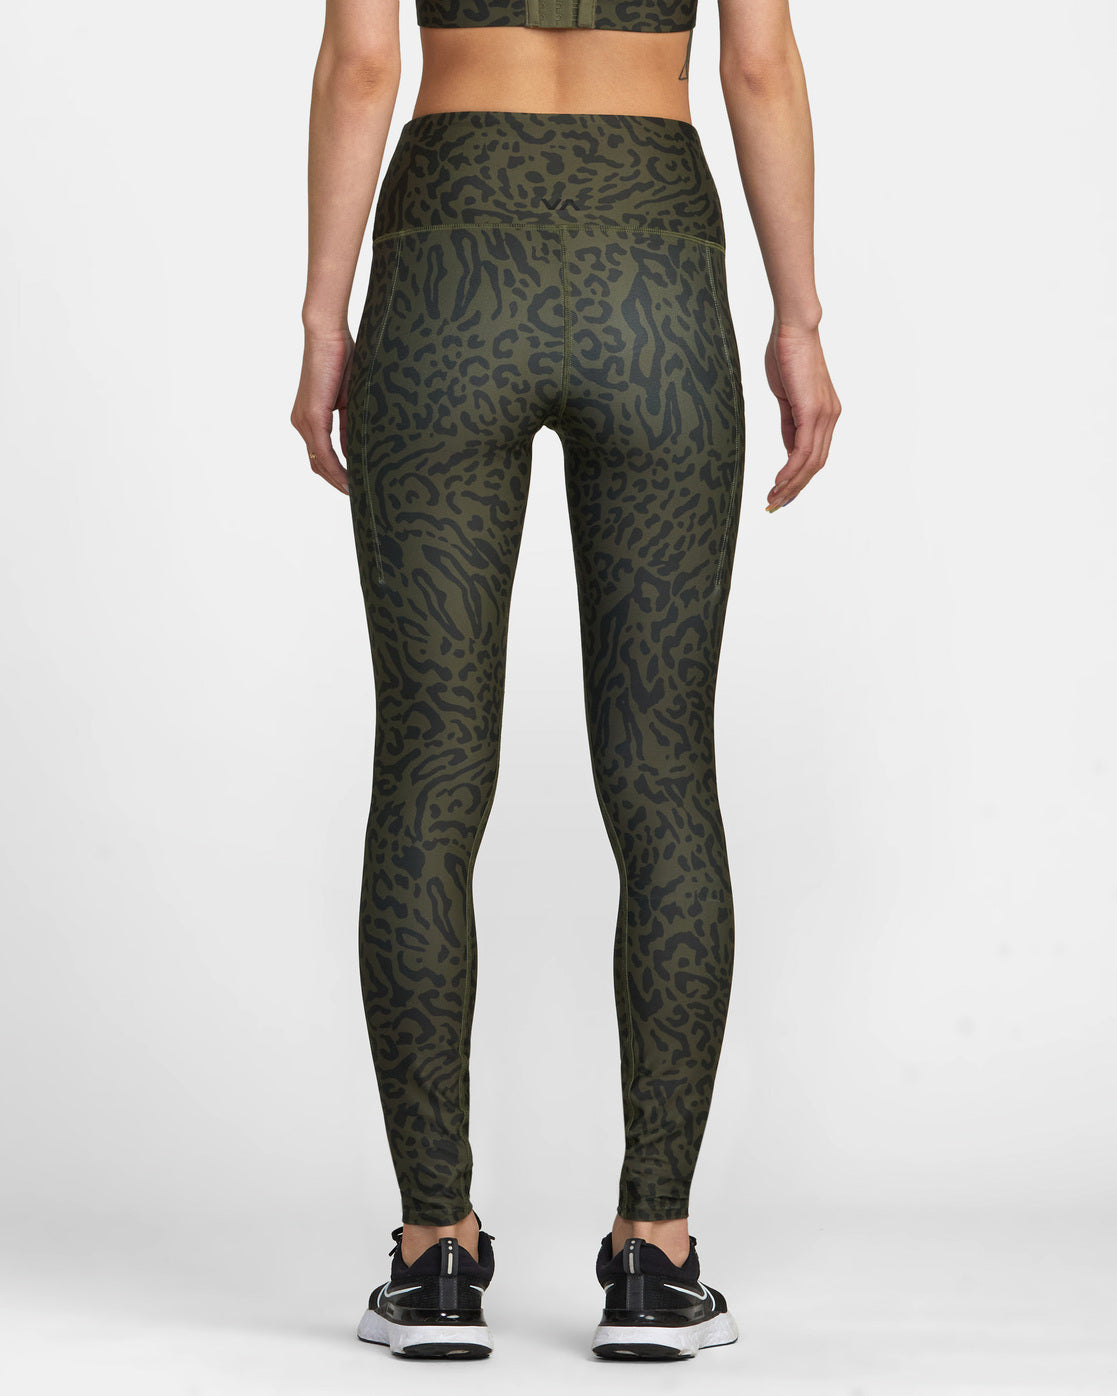 Nike | Dri-FIT One High Rise Printed Tights - Grey | The Sports Edit